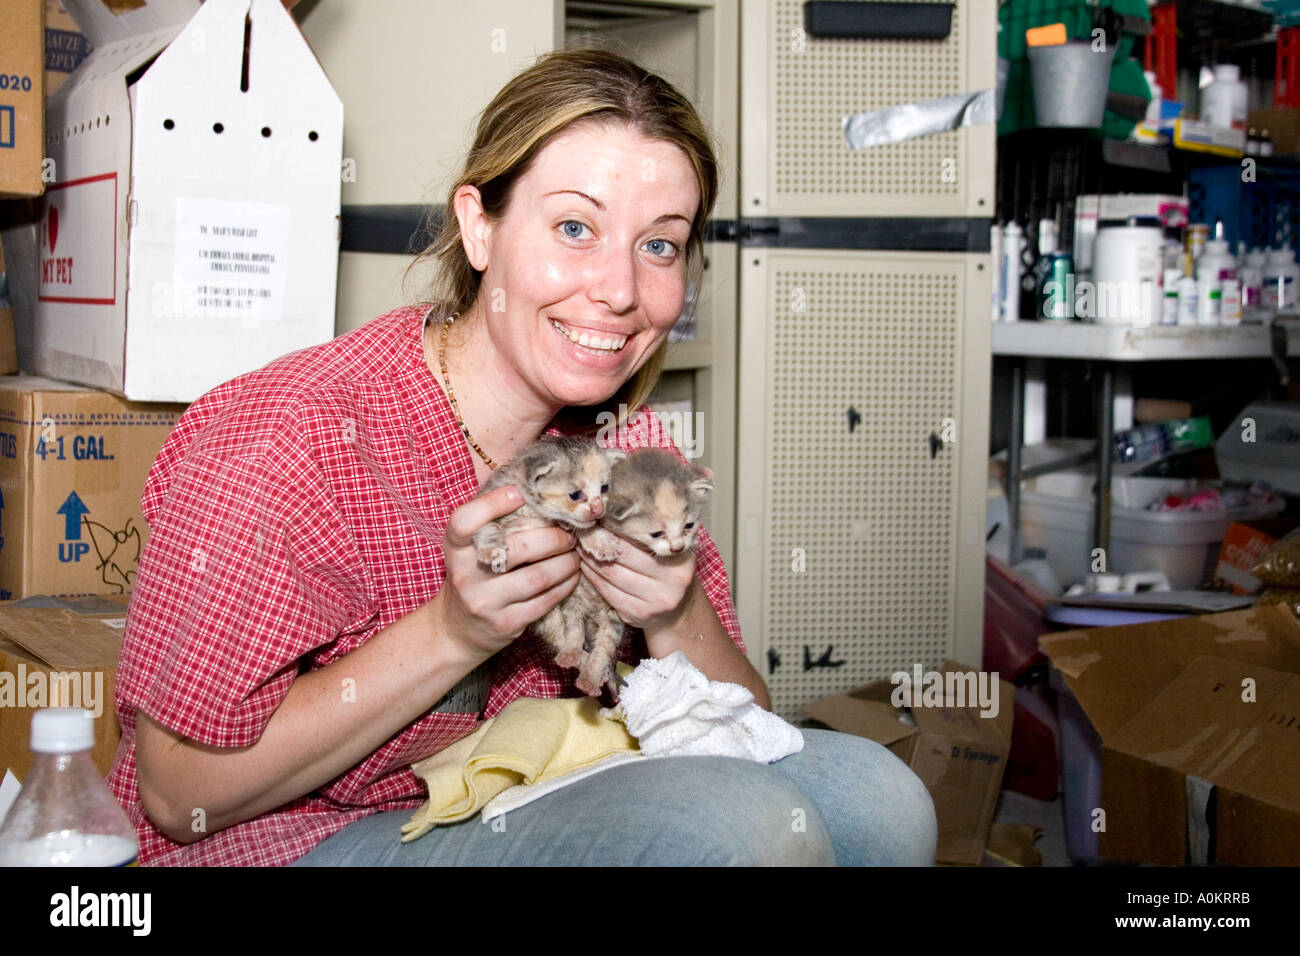 A volunteer holds up two tiny kittens in an emergency animal shelter run by Noahs Wish in Slidell Louisiana Stock Photo